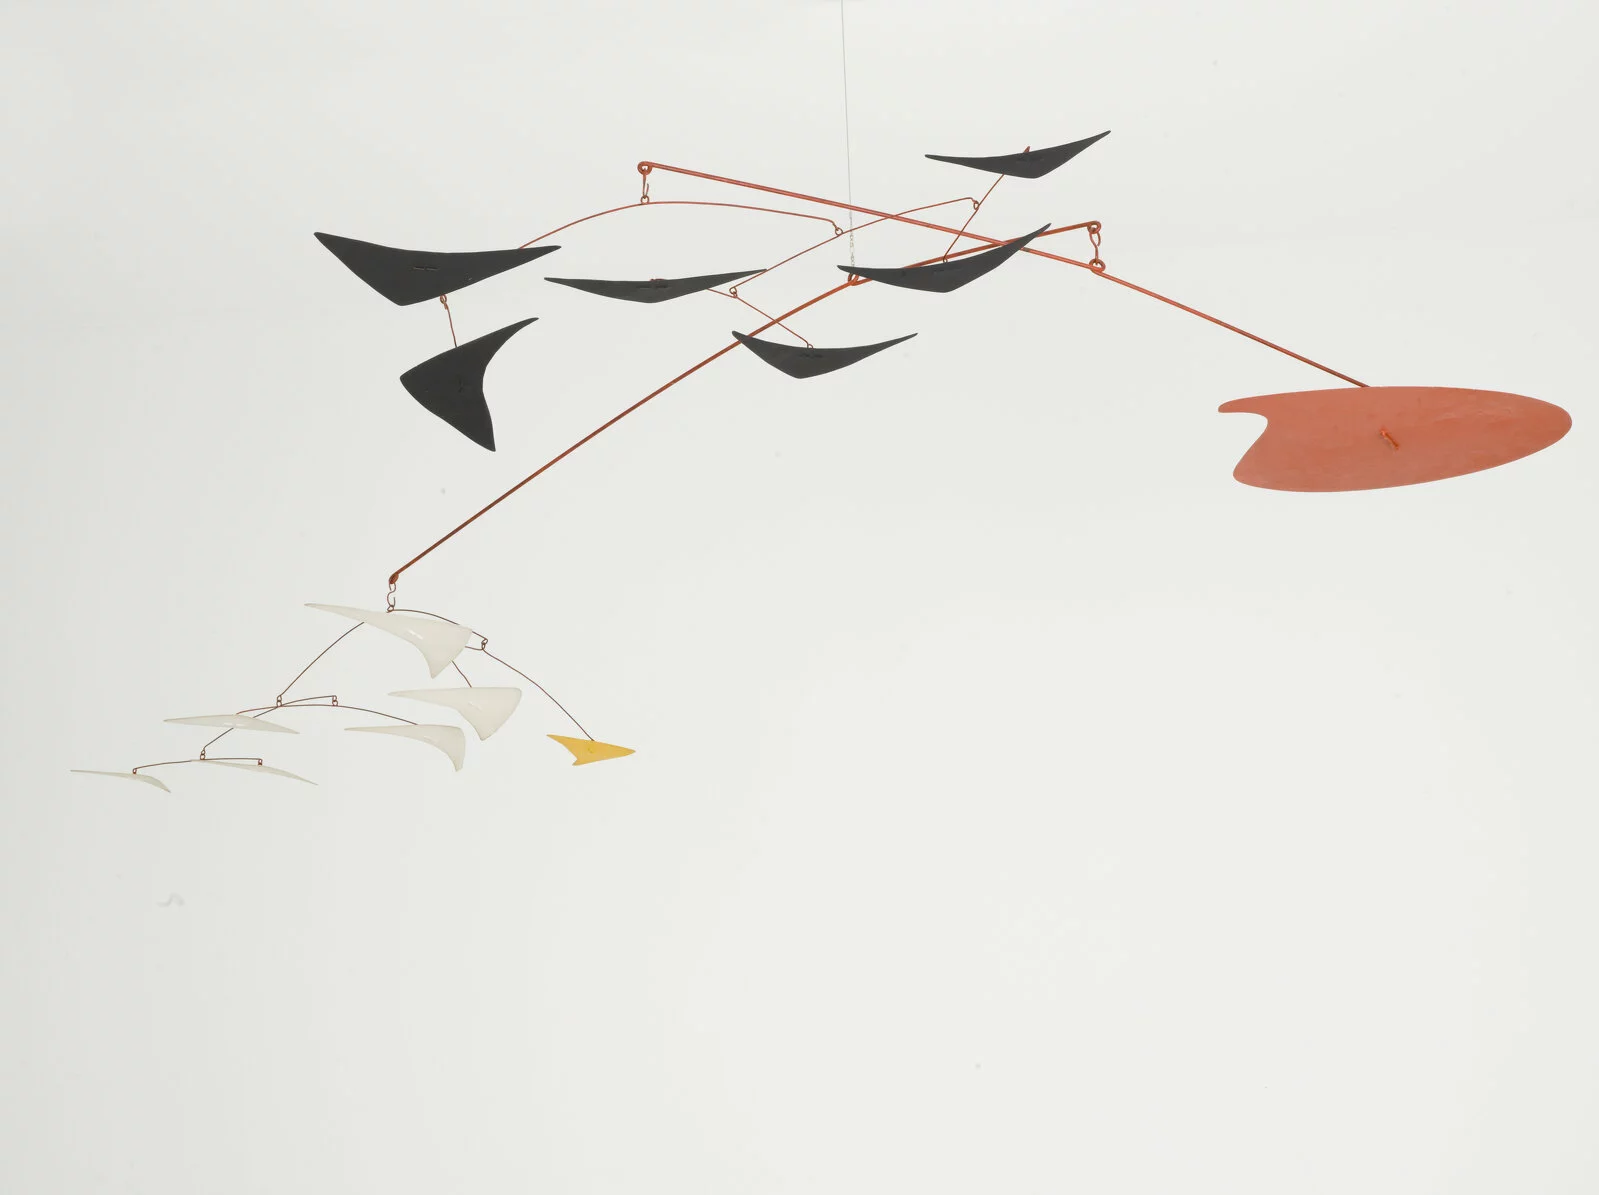 Alexander Calder (b. 1898, Lawton, PA; d. 1976, New York, NY), Les Mouettes (The Seagulls), 1965. Collection Museum of Contemporary Art Chicago, Gift of The Leonard and Ruth Horwich Family Foundation, 2019.13

© 2022 Calder Foundation, New York/Artists Rights Society (ARS), New York
Photo: Nathan Keay, © MCA Chicago
 2022/06/2019_13_edit.jpg 